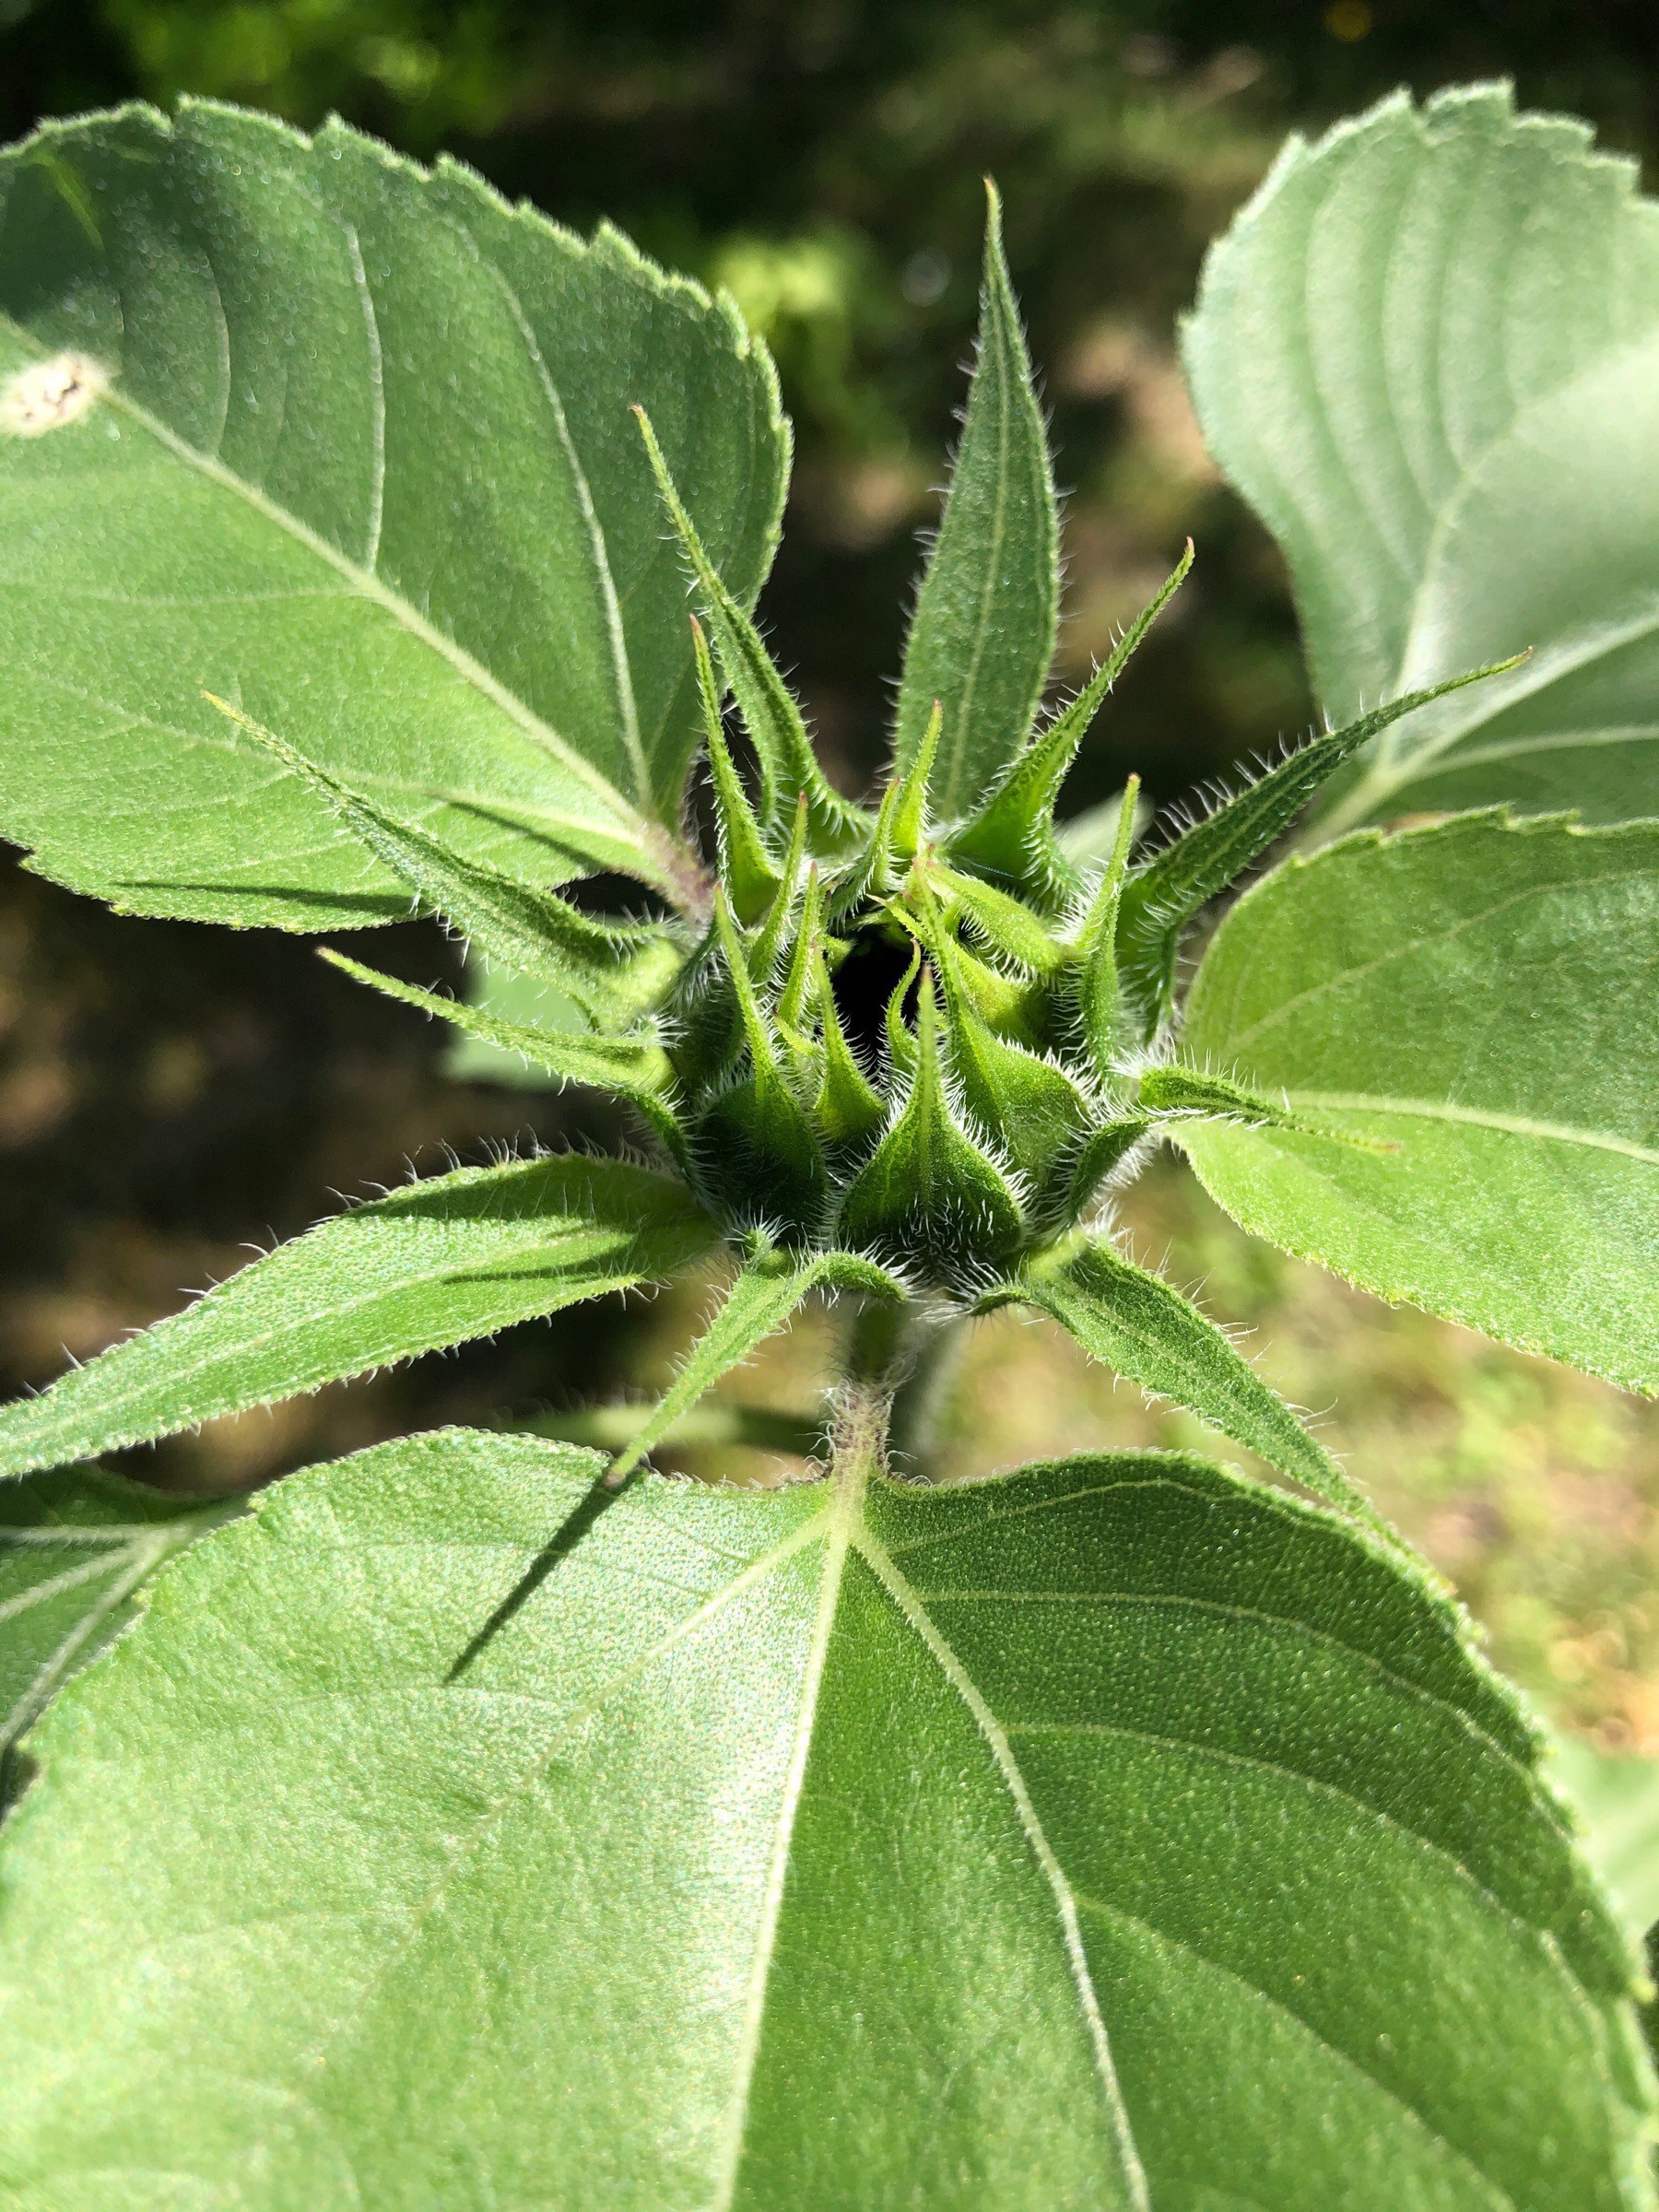 Sunflower before blooming